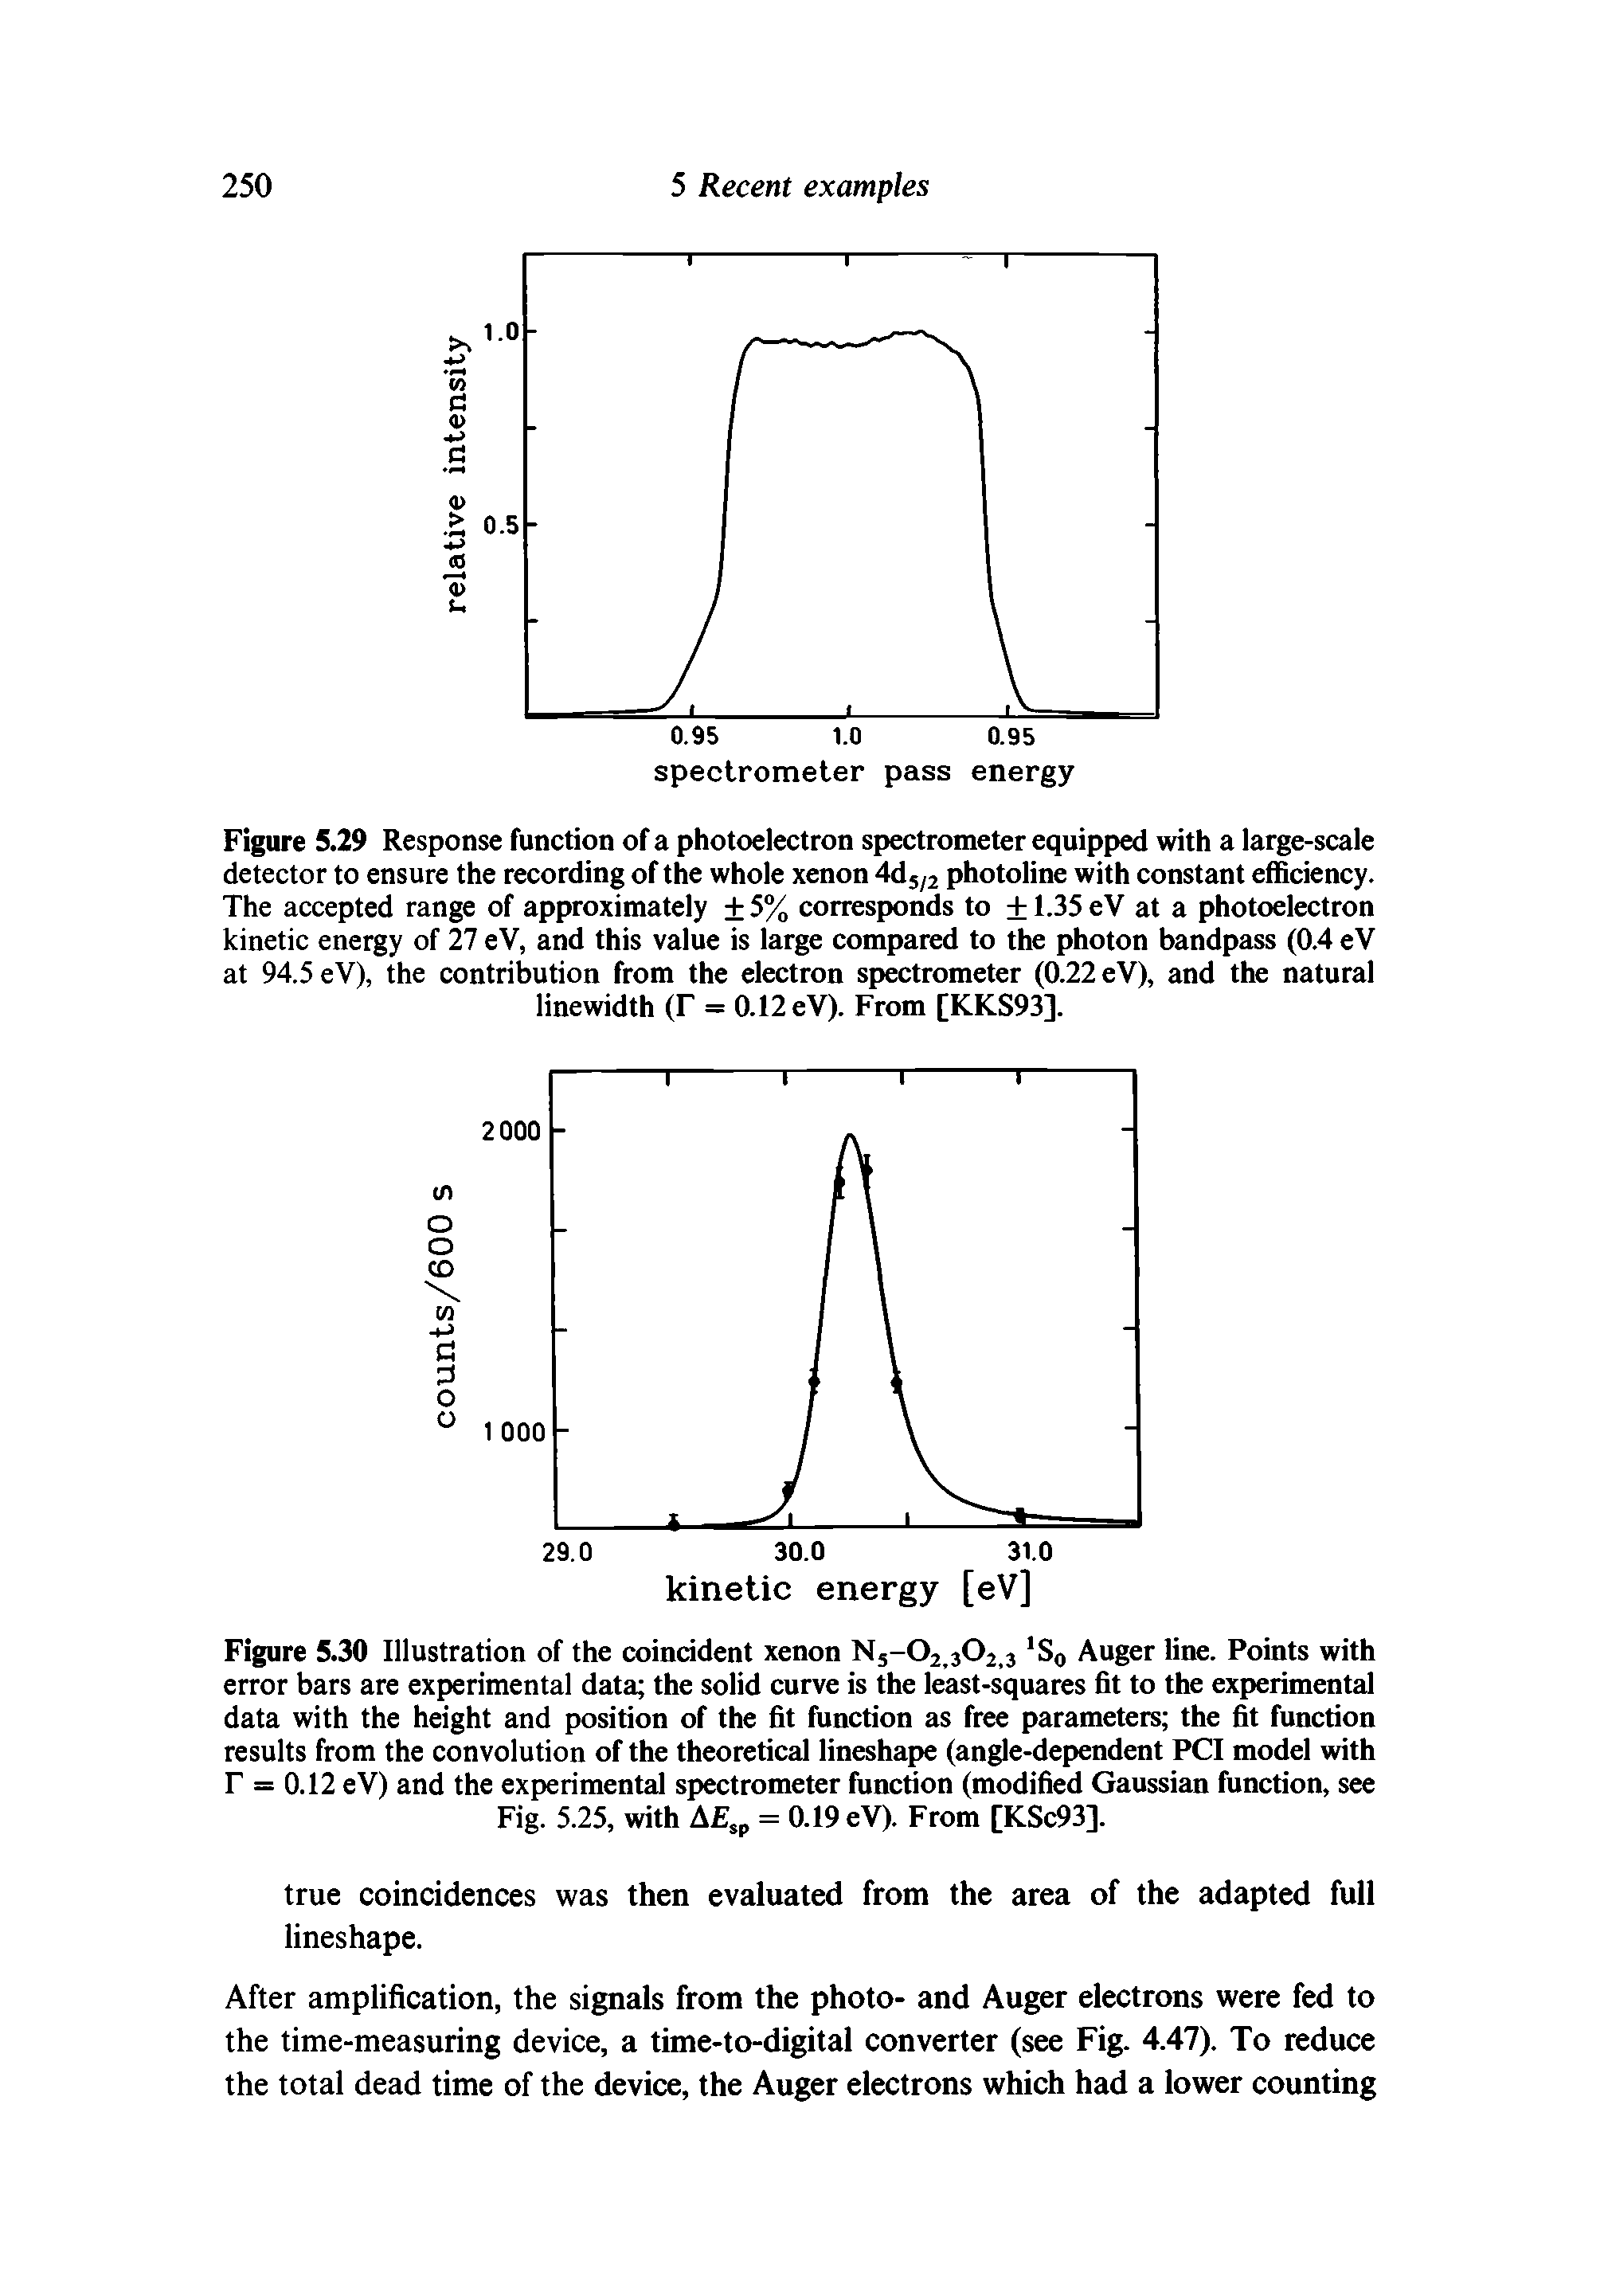 Figure 5.29 Response function of a photoelectron spectrometer equipped with a large-scale detector to ensure the recording of the whole xenon 4d5/2 photoline with constant efficiency. The accepted range of approximately 5% corresponds to +1.35 eV at a photoelectron kinetic energy of 27 eV, and this value is large compared to the photon bandpass (0.4 eV at 94.5 eV), the contribution from the electron spectrometer (0.22 eV), and the natural linewidth (T = 0.12 eV). From [KKS93].